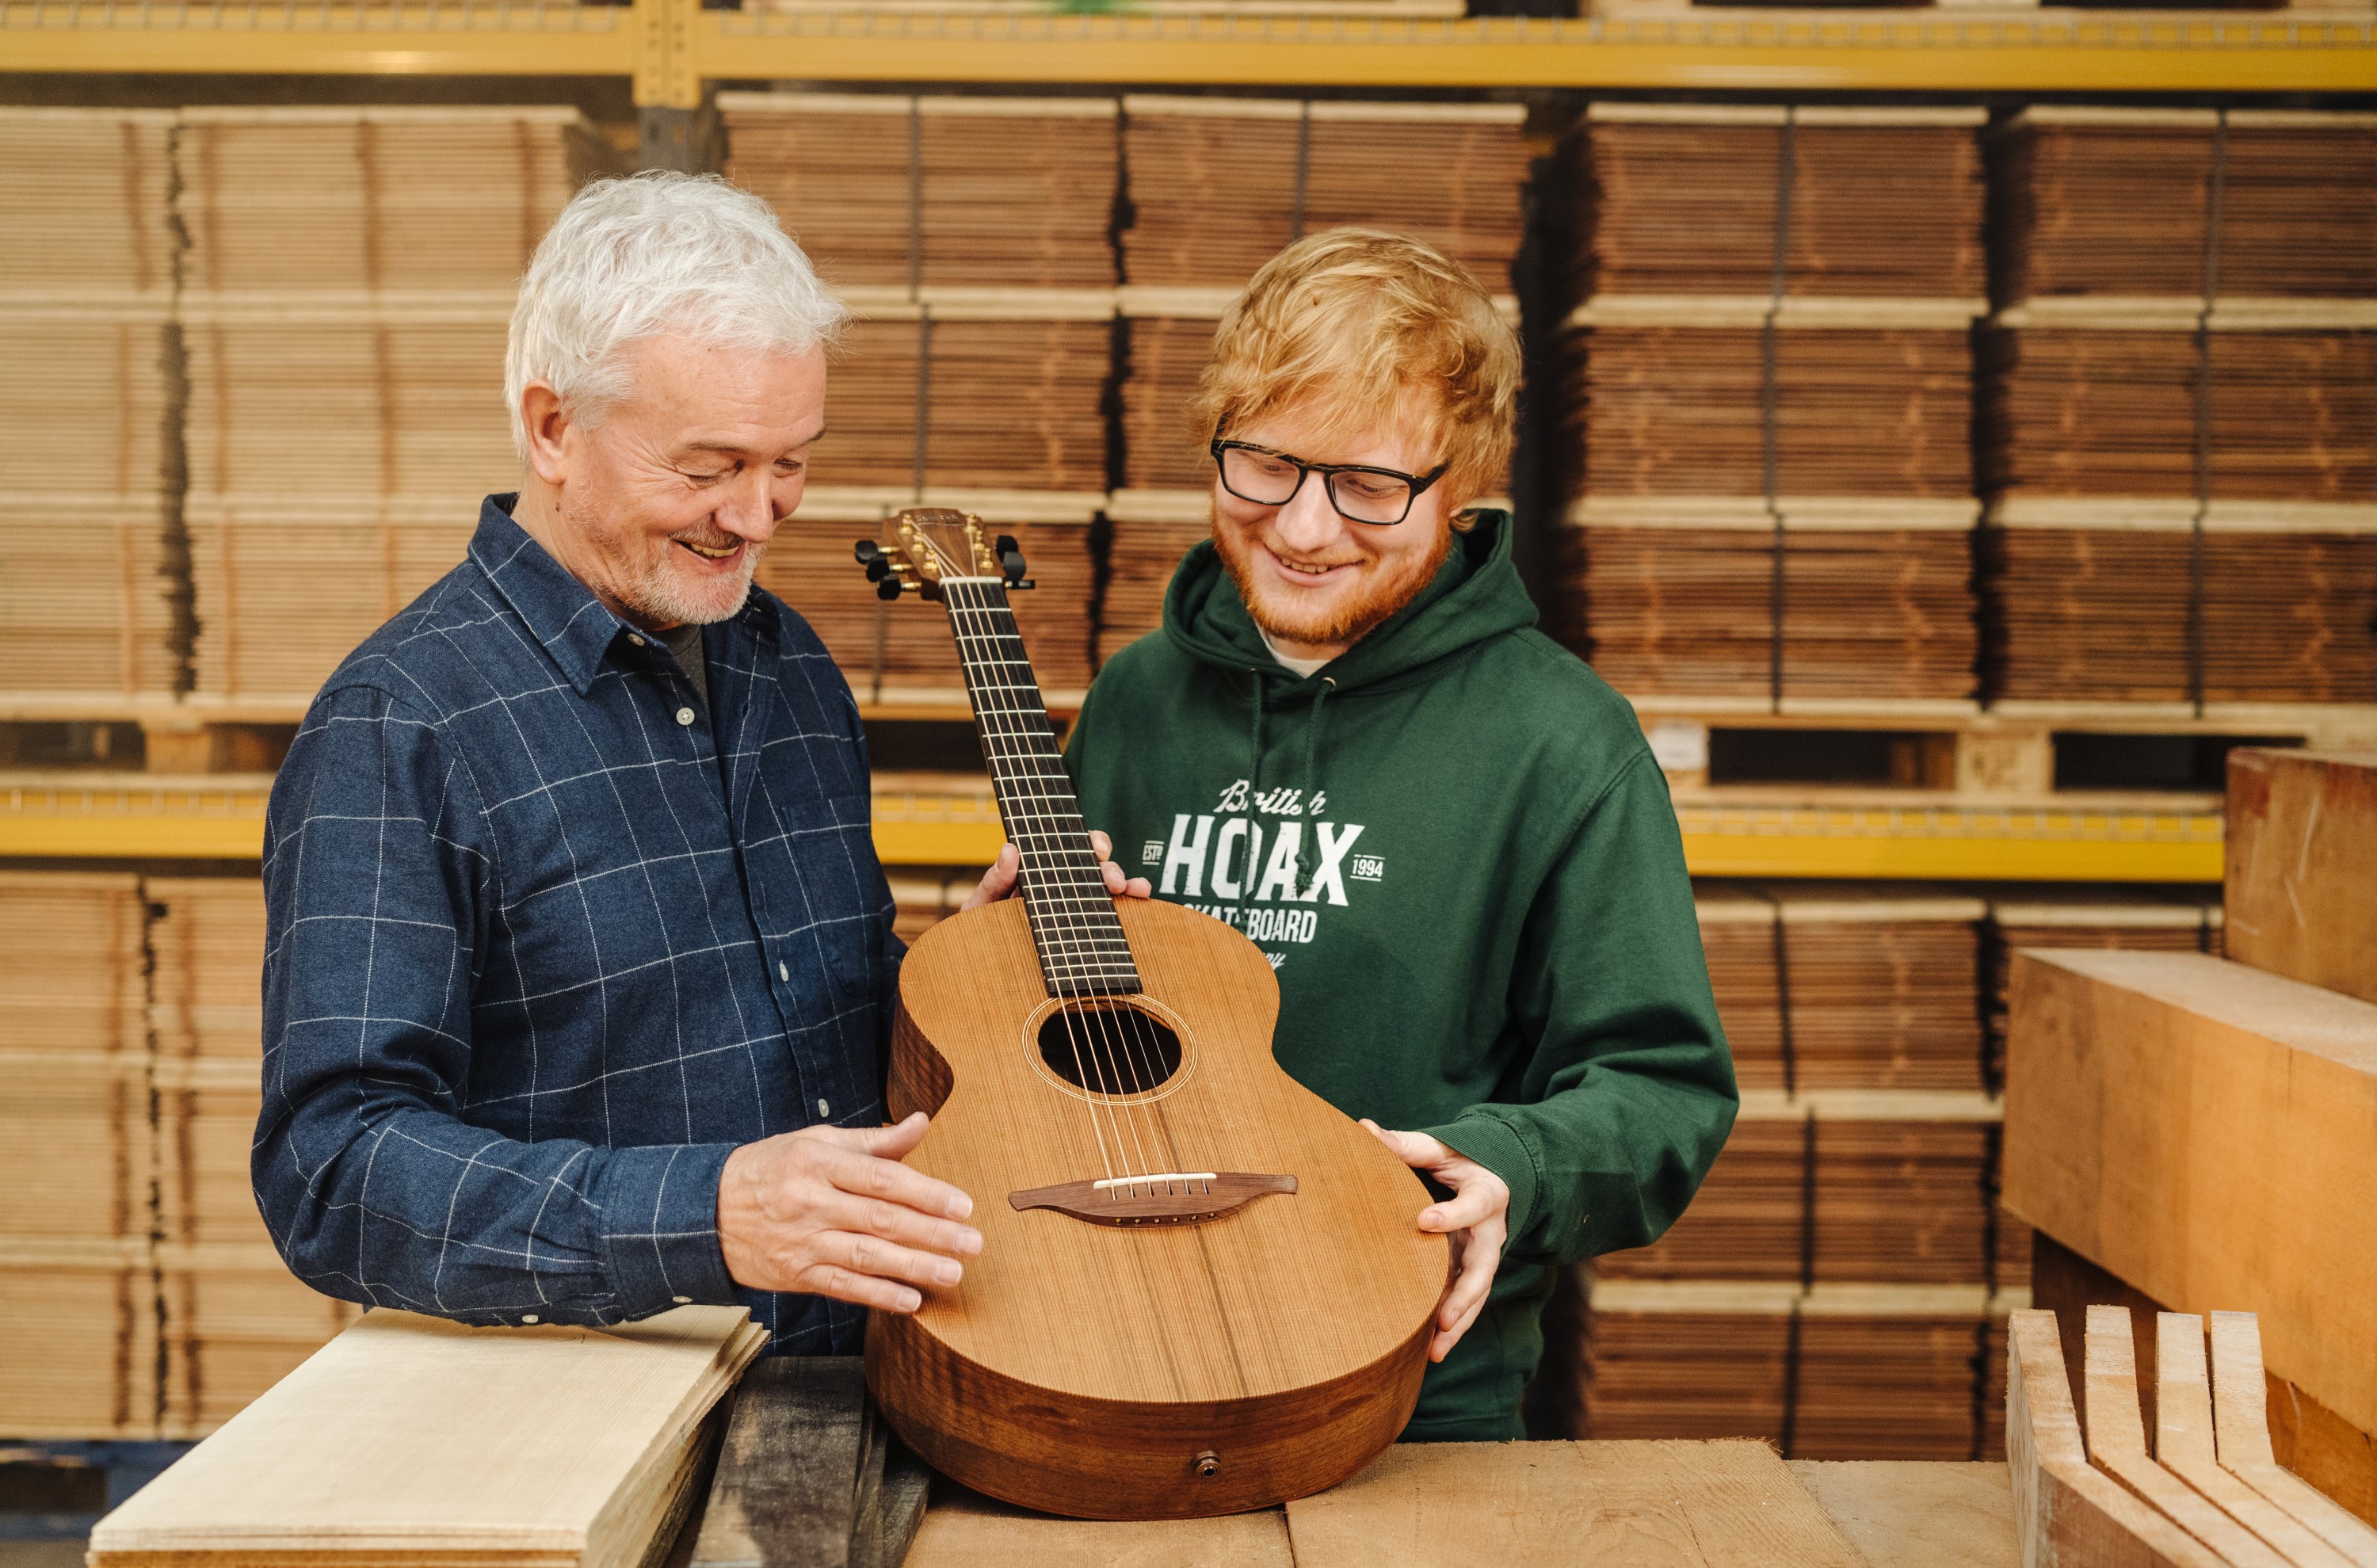 Ed Sheeran and guitar maker George Lowden with the prototype Equals guitar that Sheeran has donated as the prize in a charity raffle. (GeeWizz/ PA)